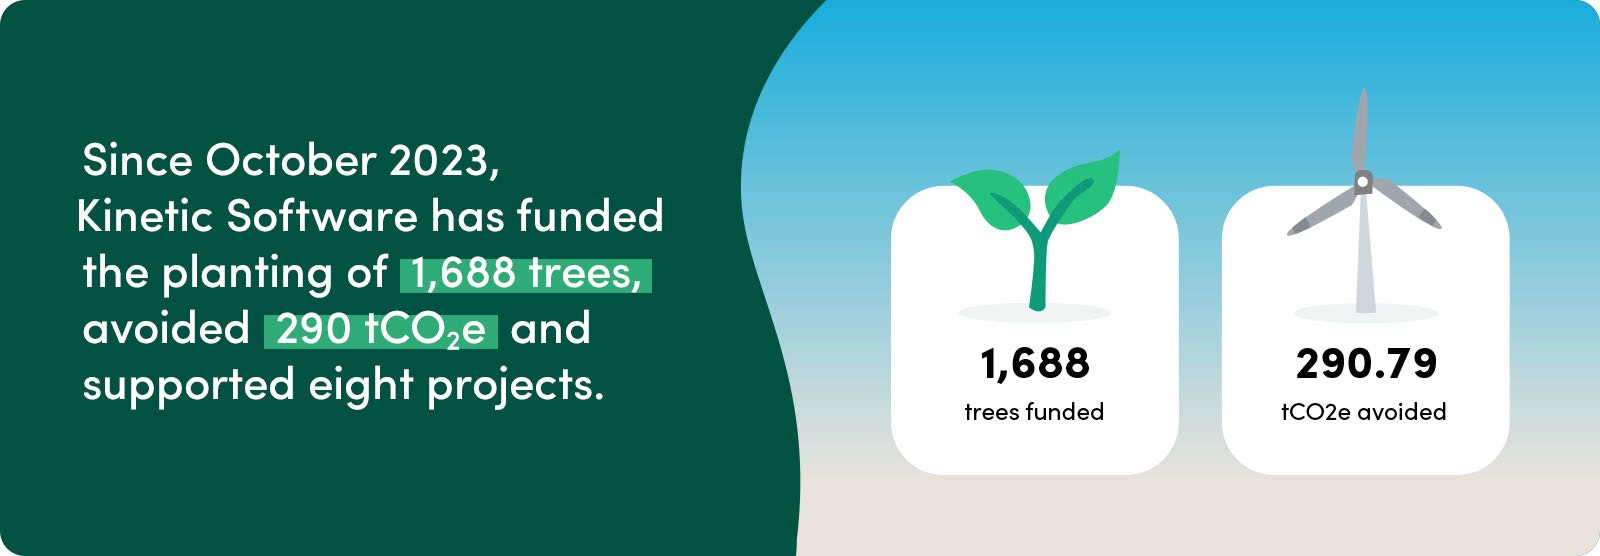 Since October 2023, Kinetic Software has funded the planting of 1,688 trees, avoided 290 tCO2e and supported eight projects.